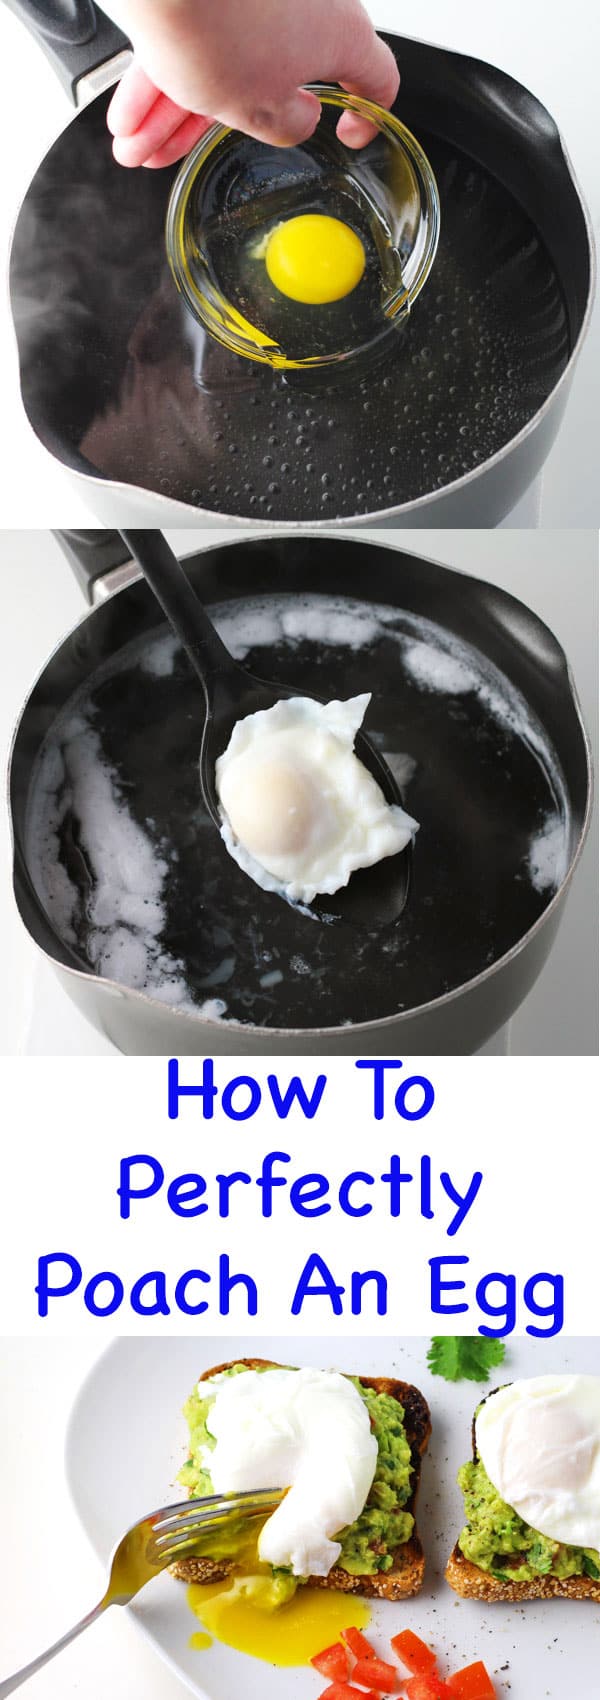 How To Perfectly Poach An Egg ~ These tips make it so simple!